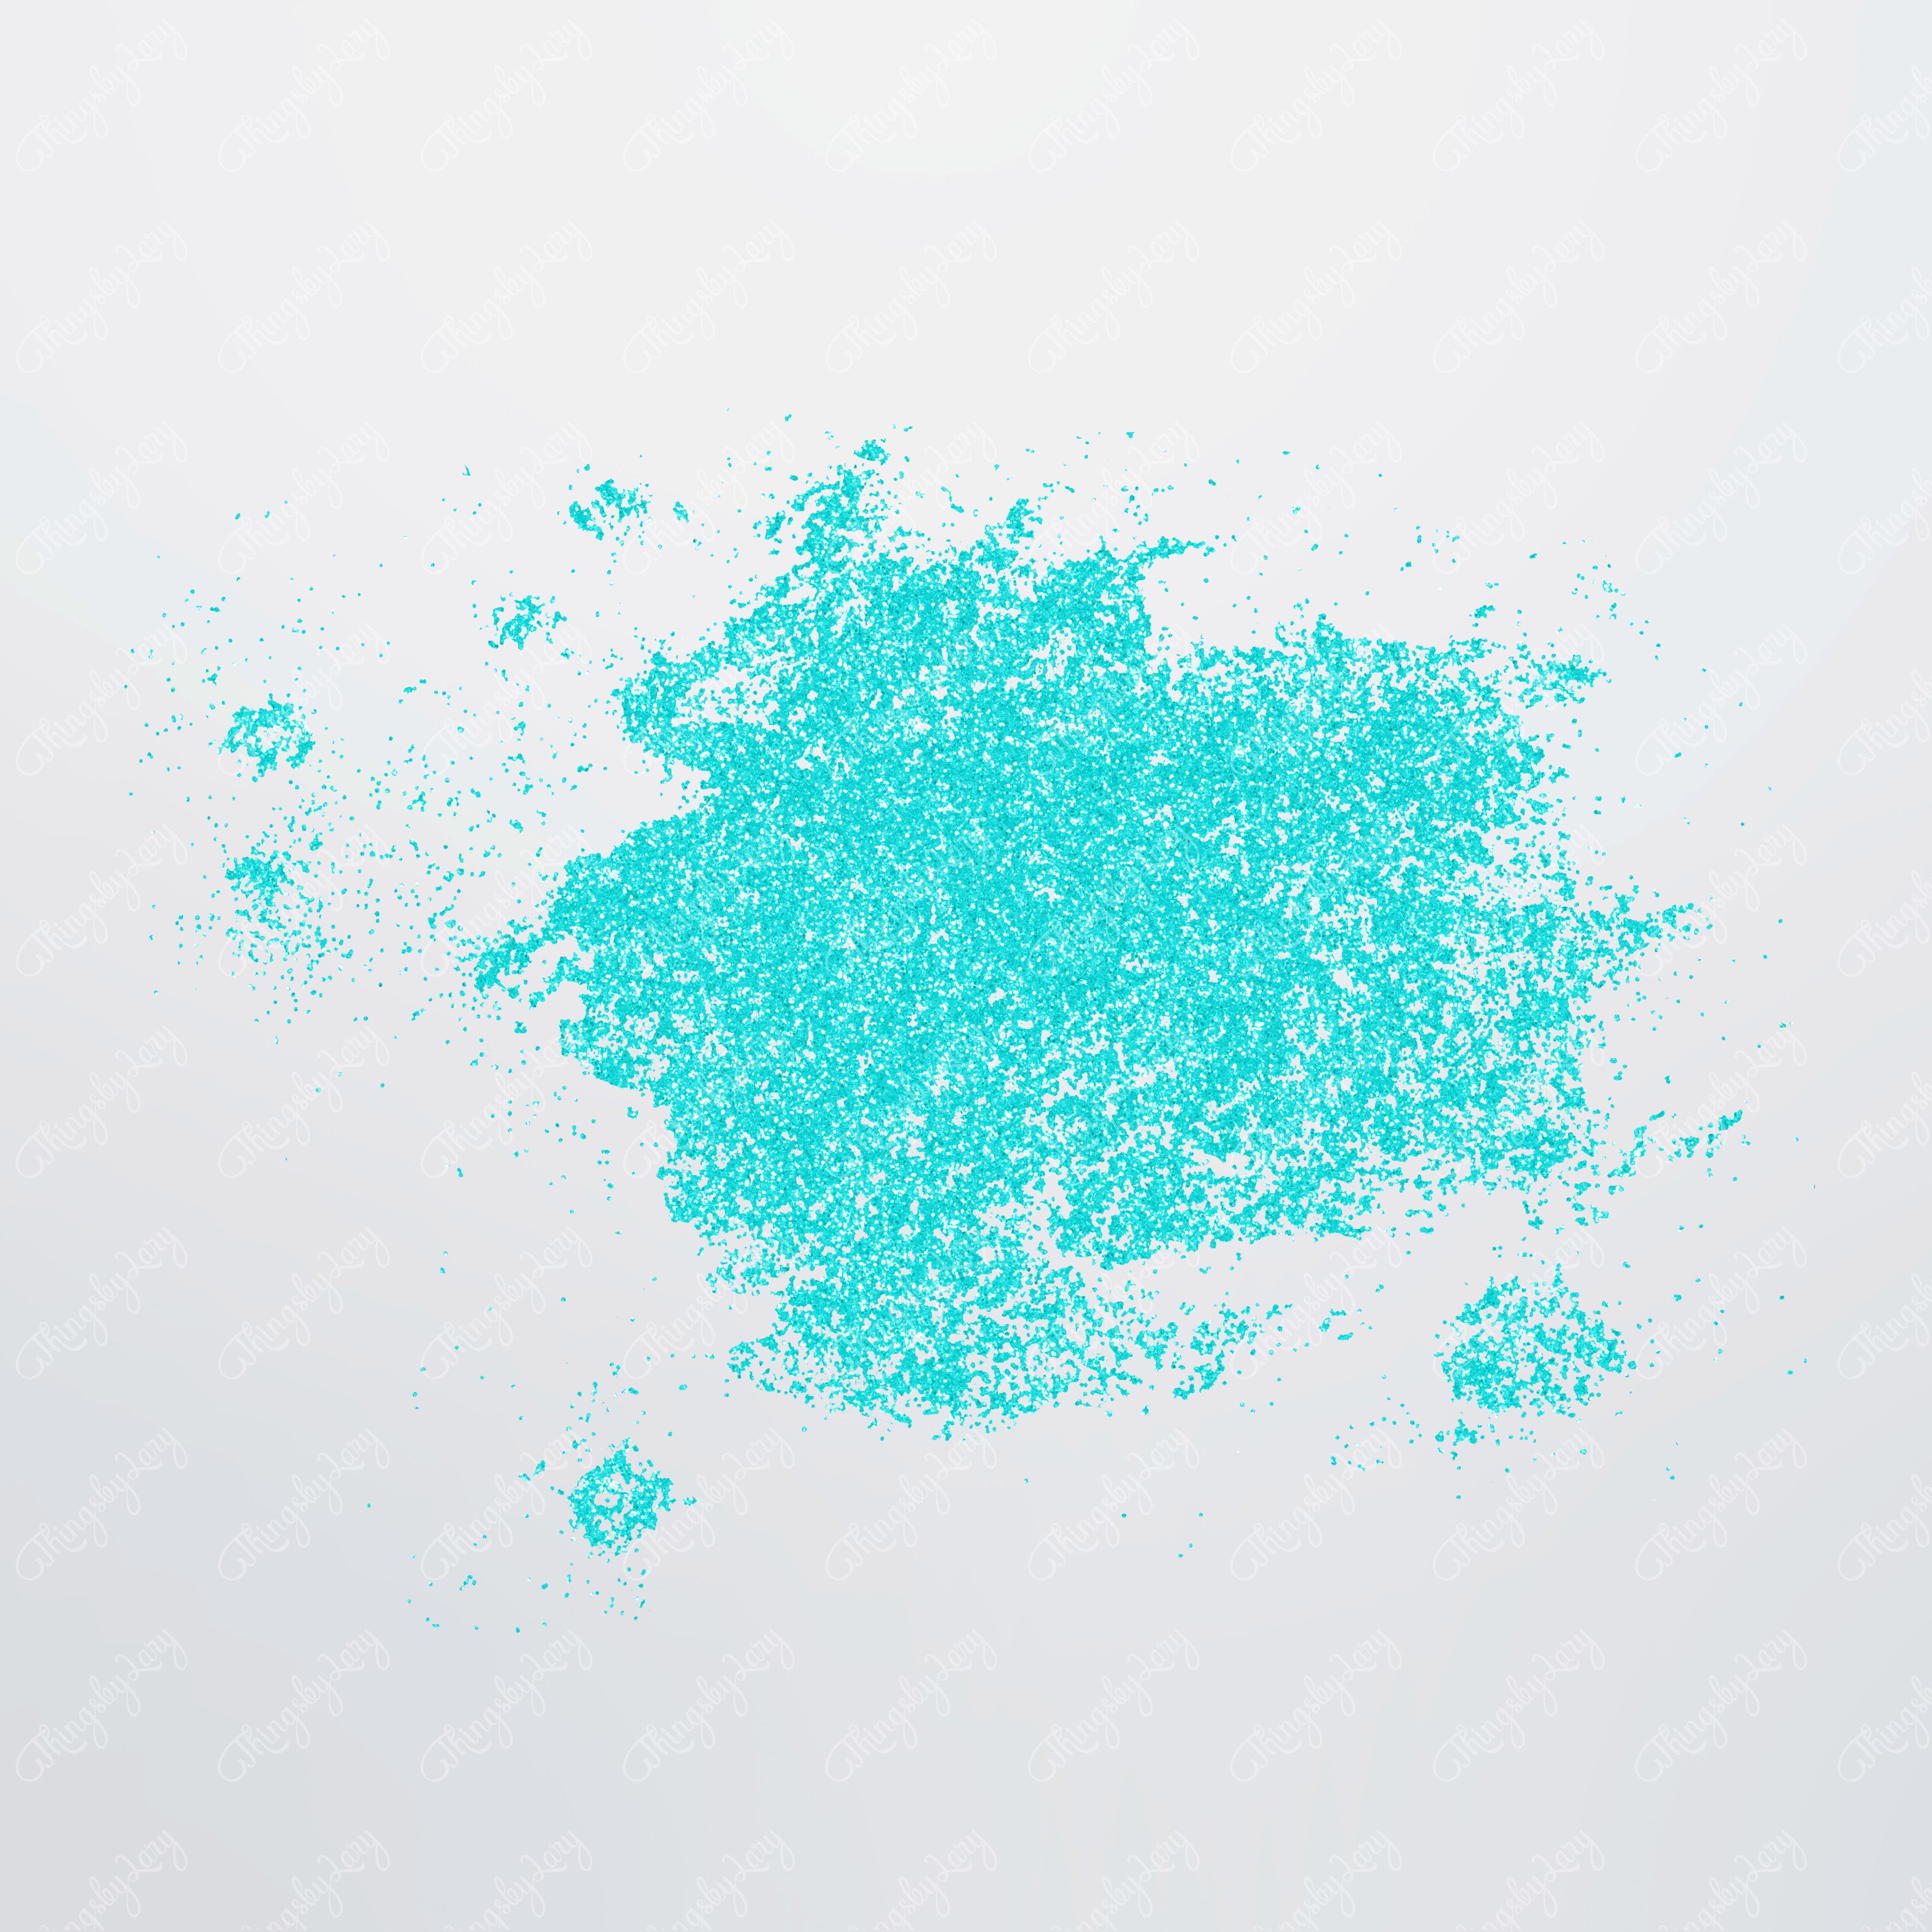 70 Cyan Glitter Particles Set PNG Overlay Images